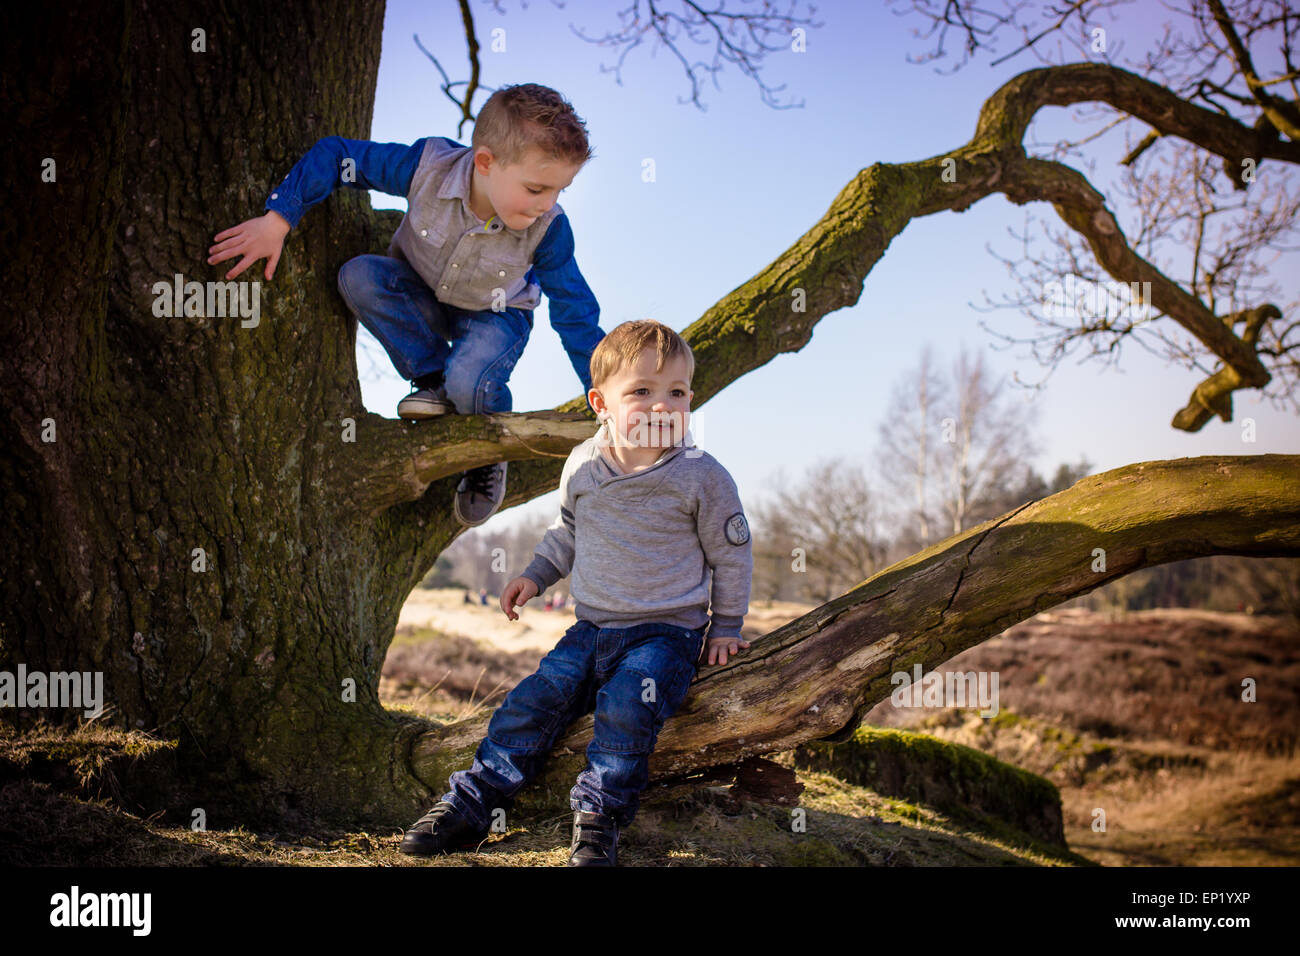 Two boys playing outside Stock Photo